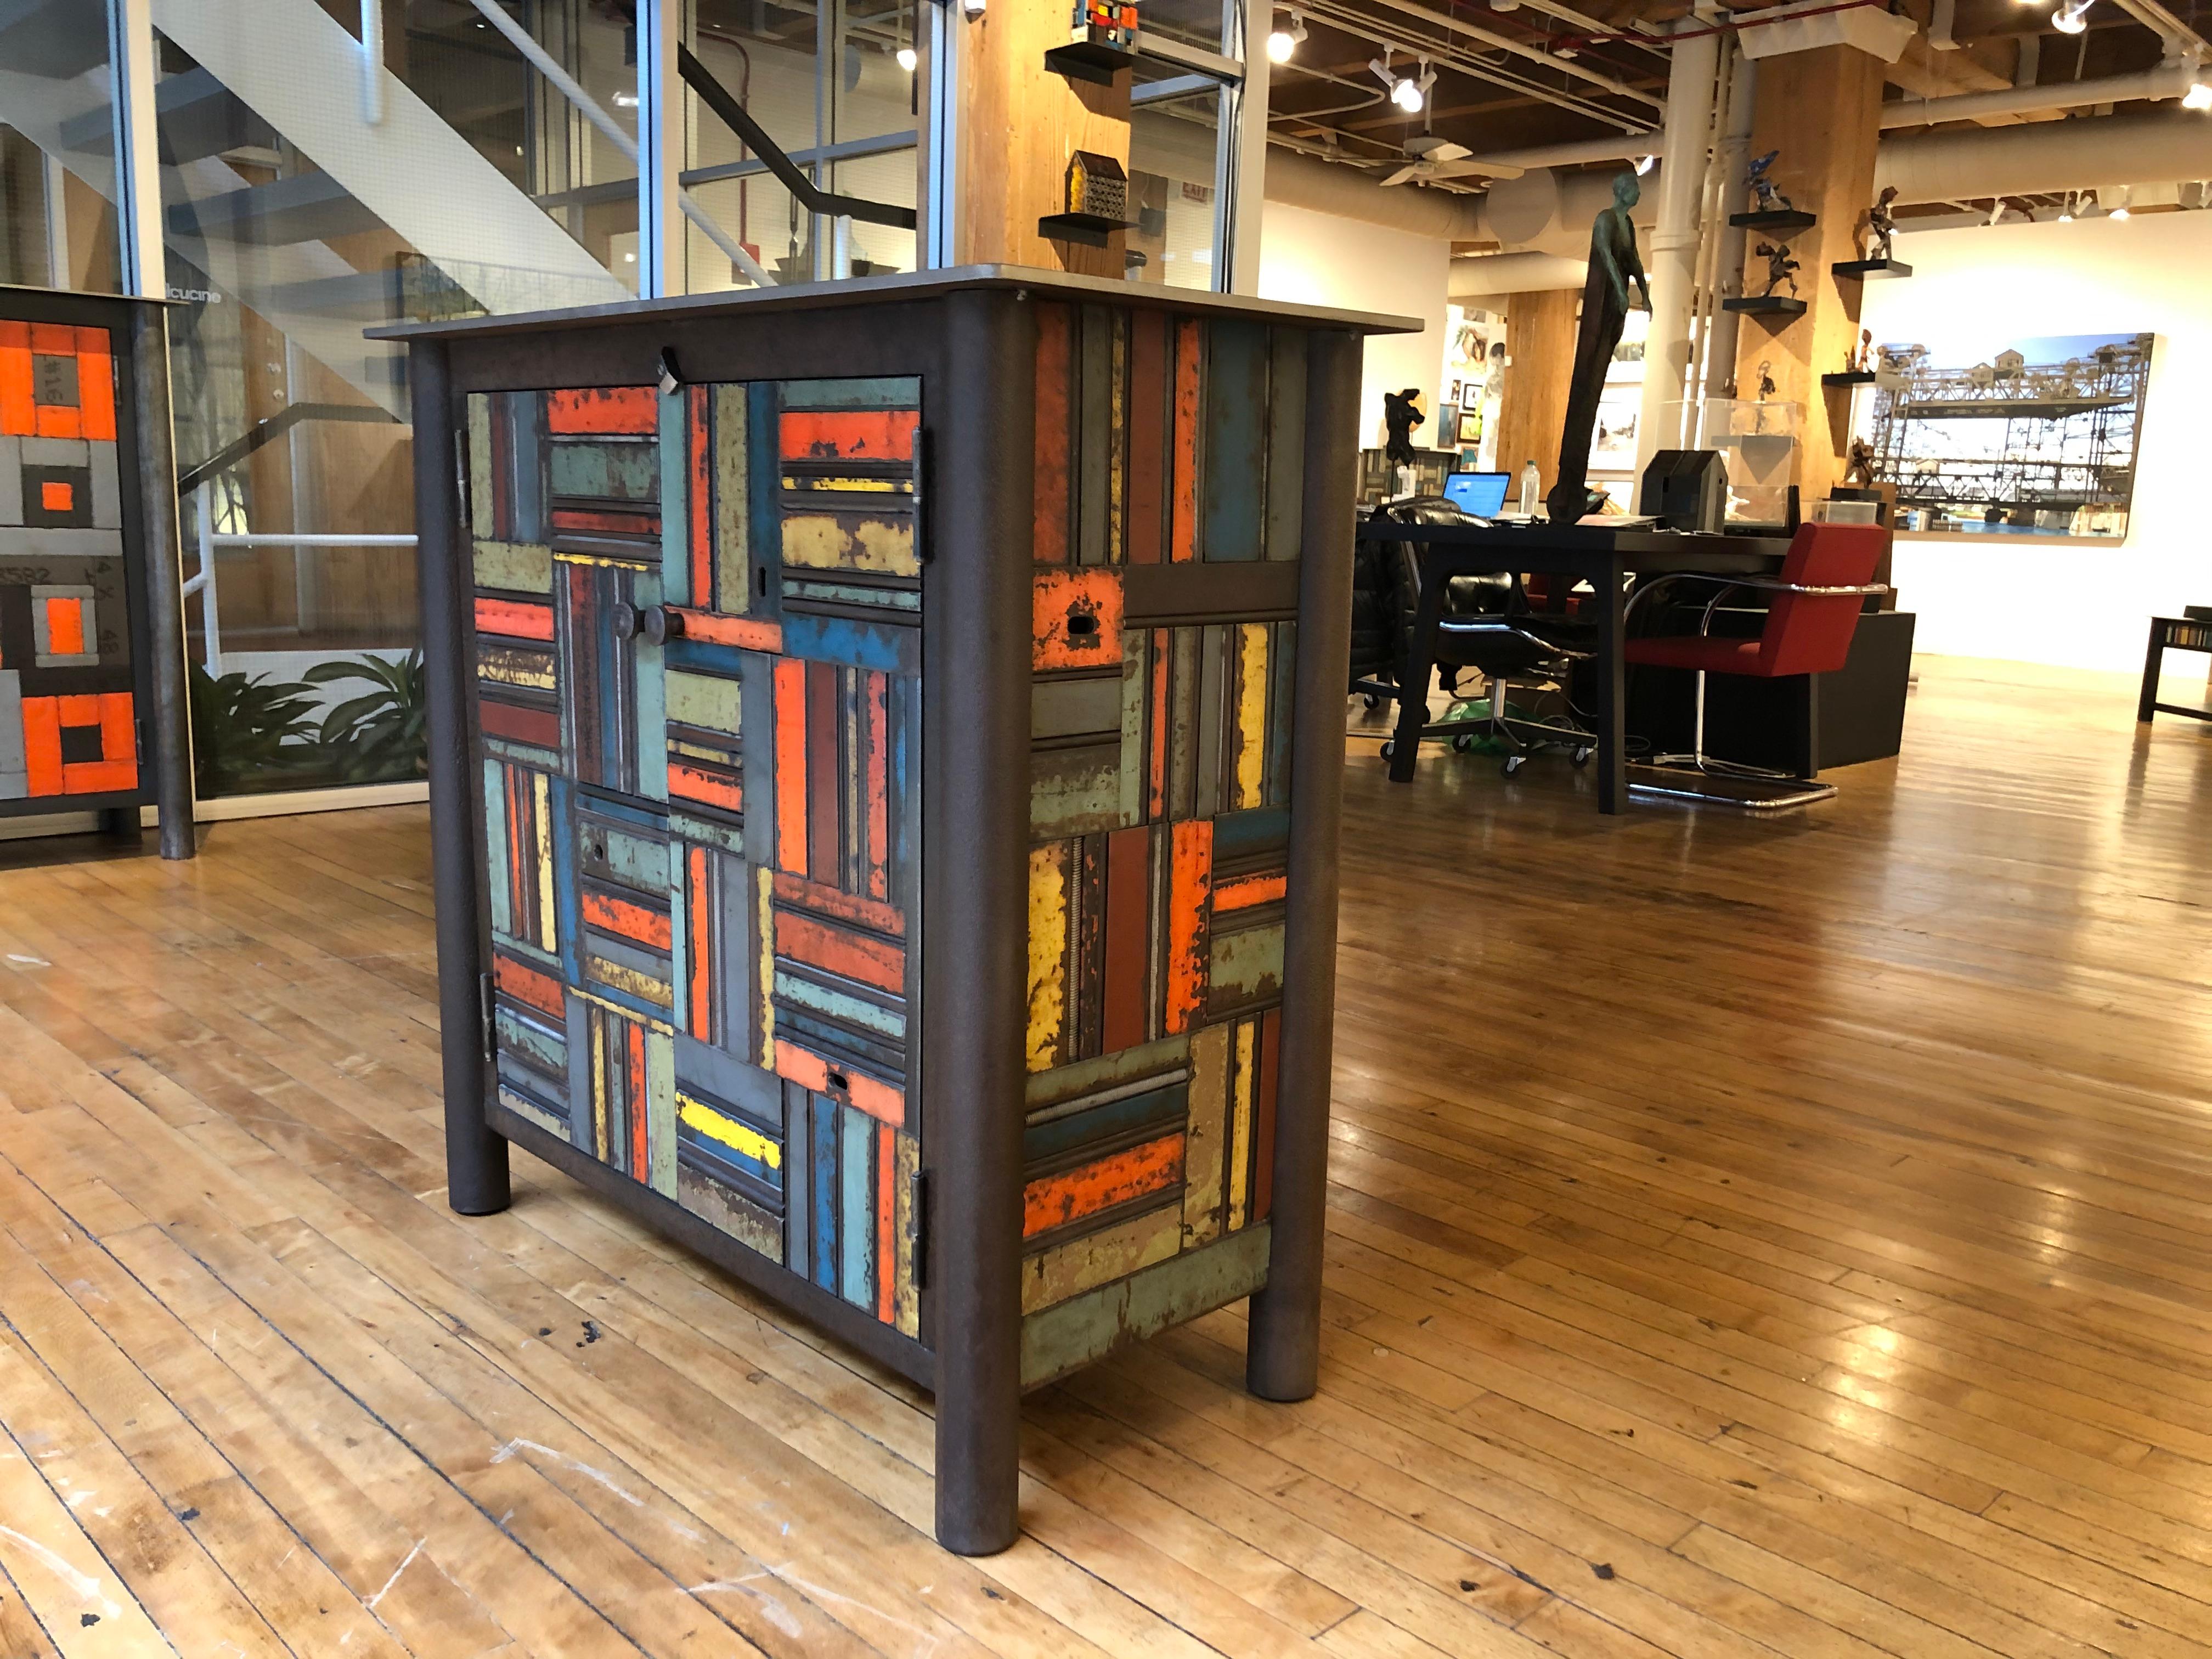 This is a totally functional two door cupboard. It is created from natural rusted steel and found steel. The legs are made from salvaged pipe. The panels on the door fronts and sides are made from salvaged pieces of steel with the original paint and